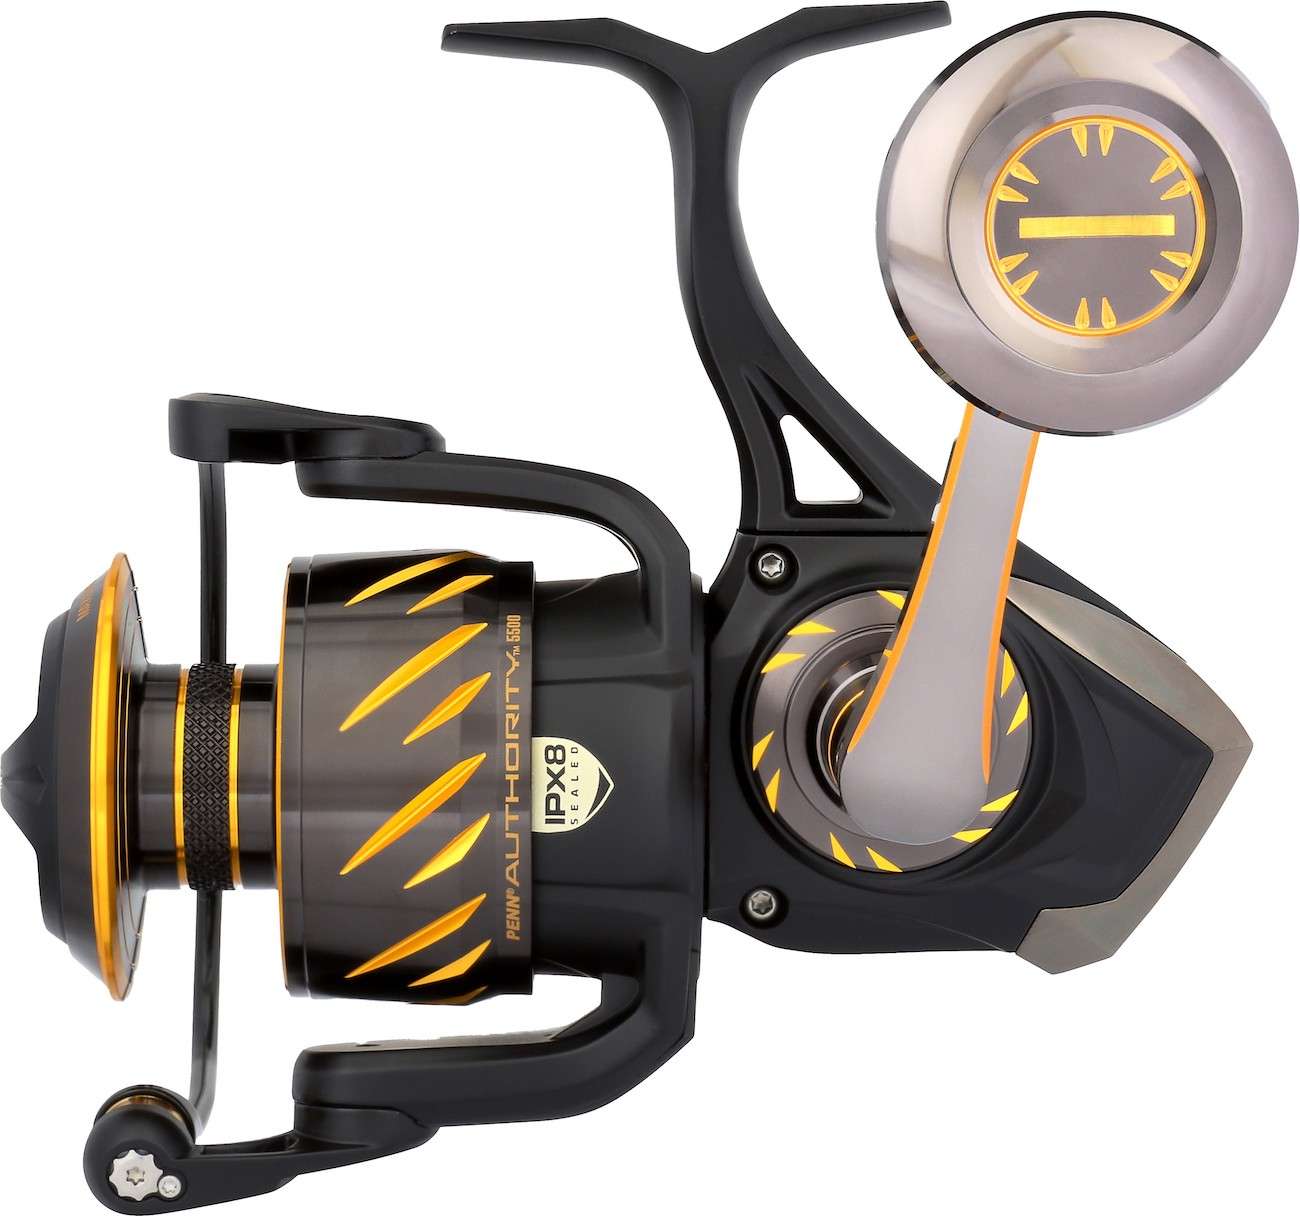 https://i.tackledirect.com/images/inset2/penn-authority-ath5500-spinning-reel.jpg